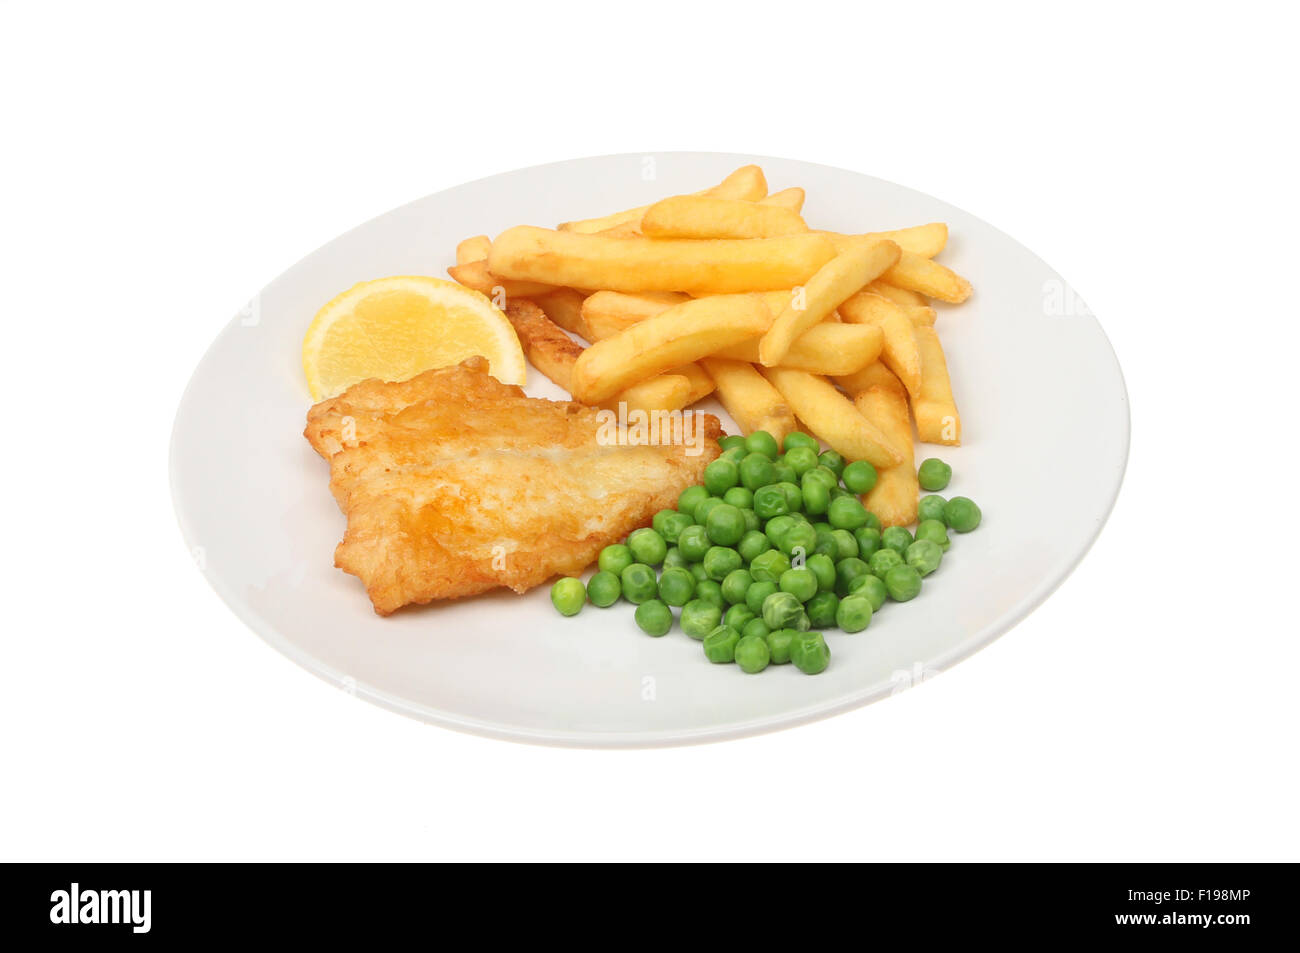 battered fish, chips and peas with a wedge of lemon on a plate isolated against white Stock Photo